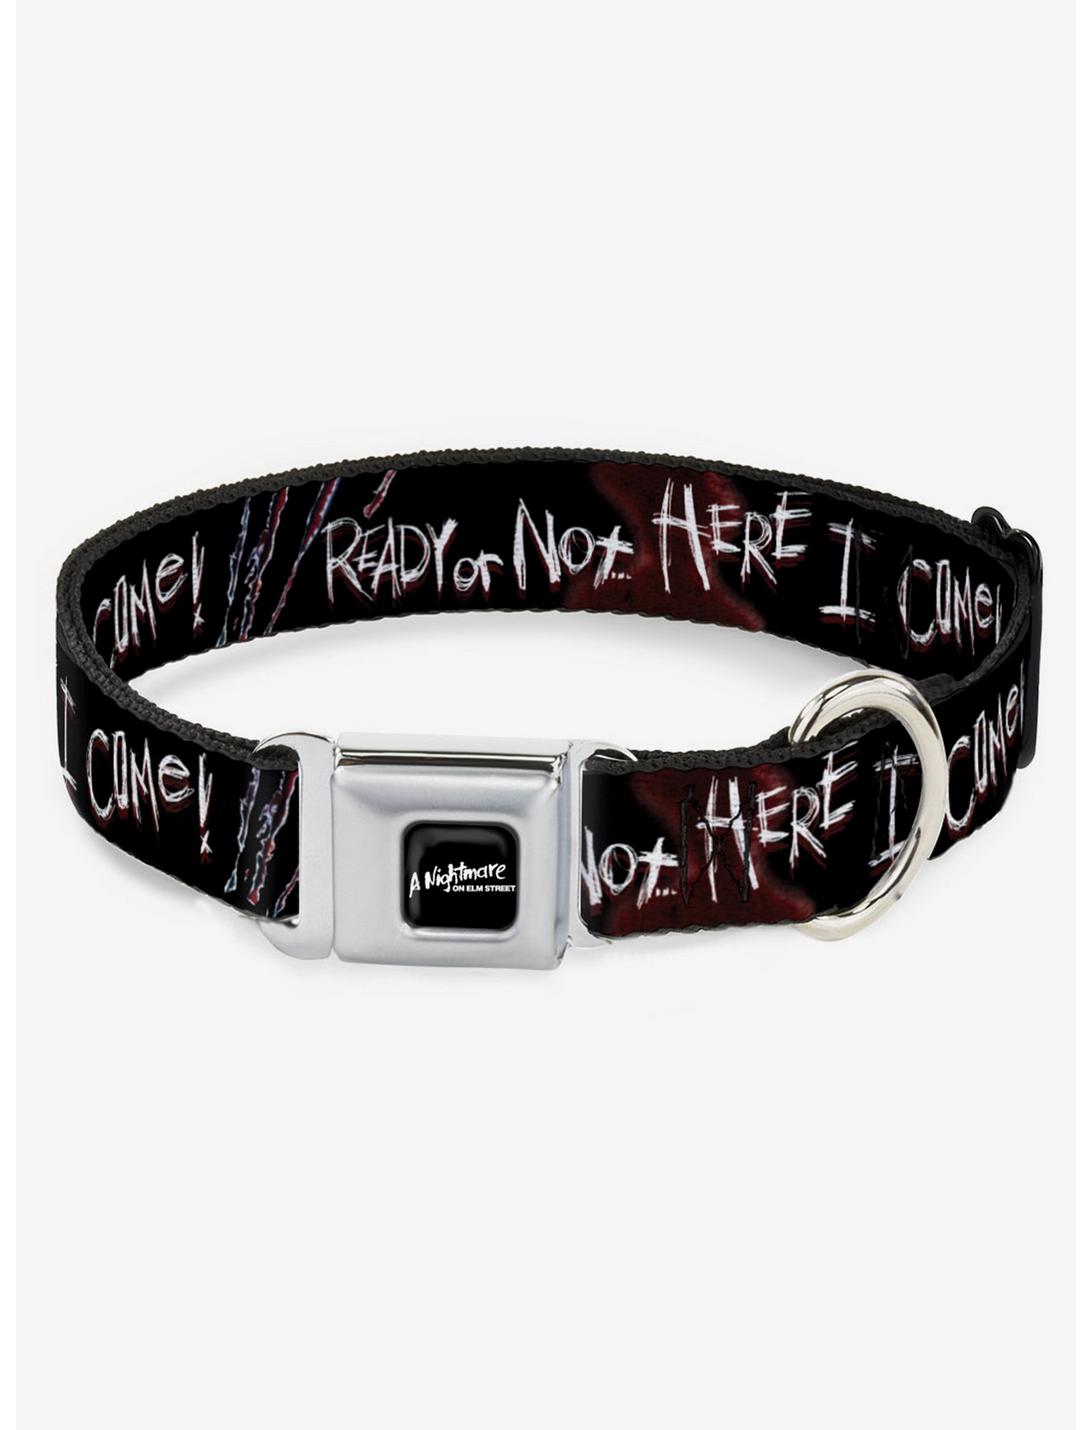 A Nightmare on Elm Street "Ready or Not... Here I Come" Seatbelt Buckle Dog Collar, BLACK, hi-res